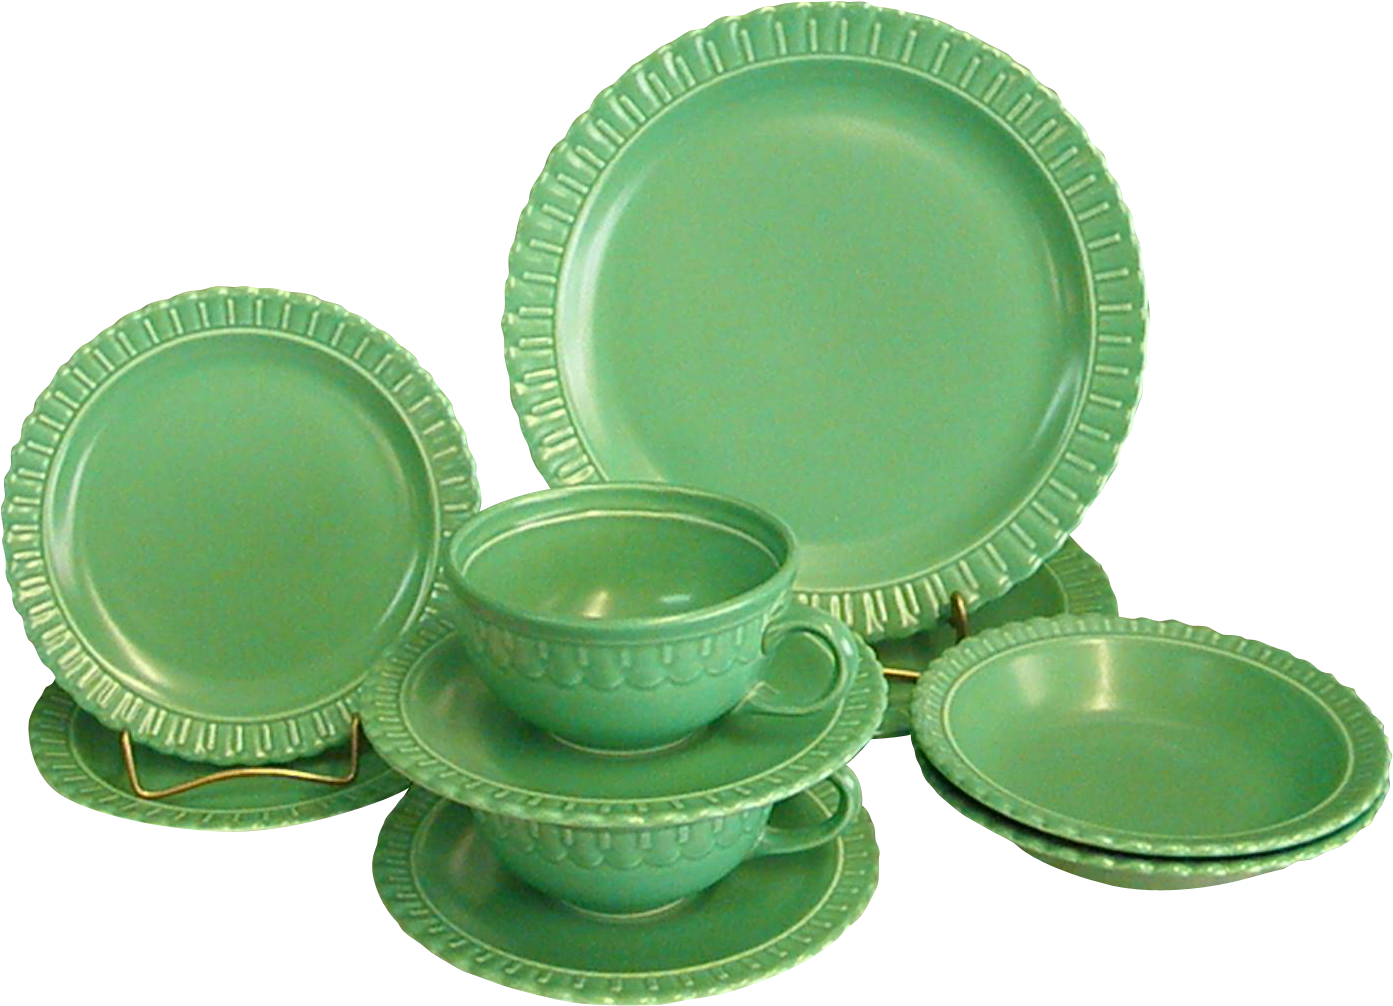 A Group Of Green Plates And Cups